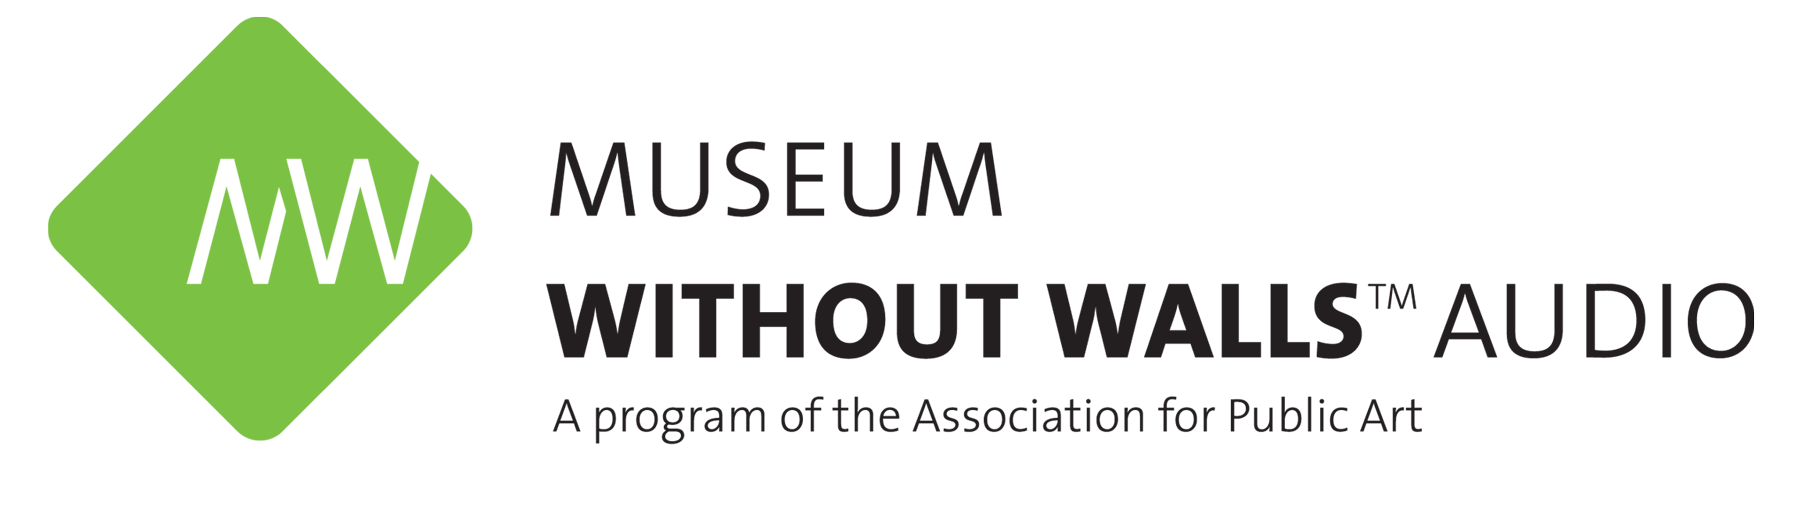 Museum Without Walls: AUDIO green logo